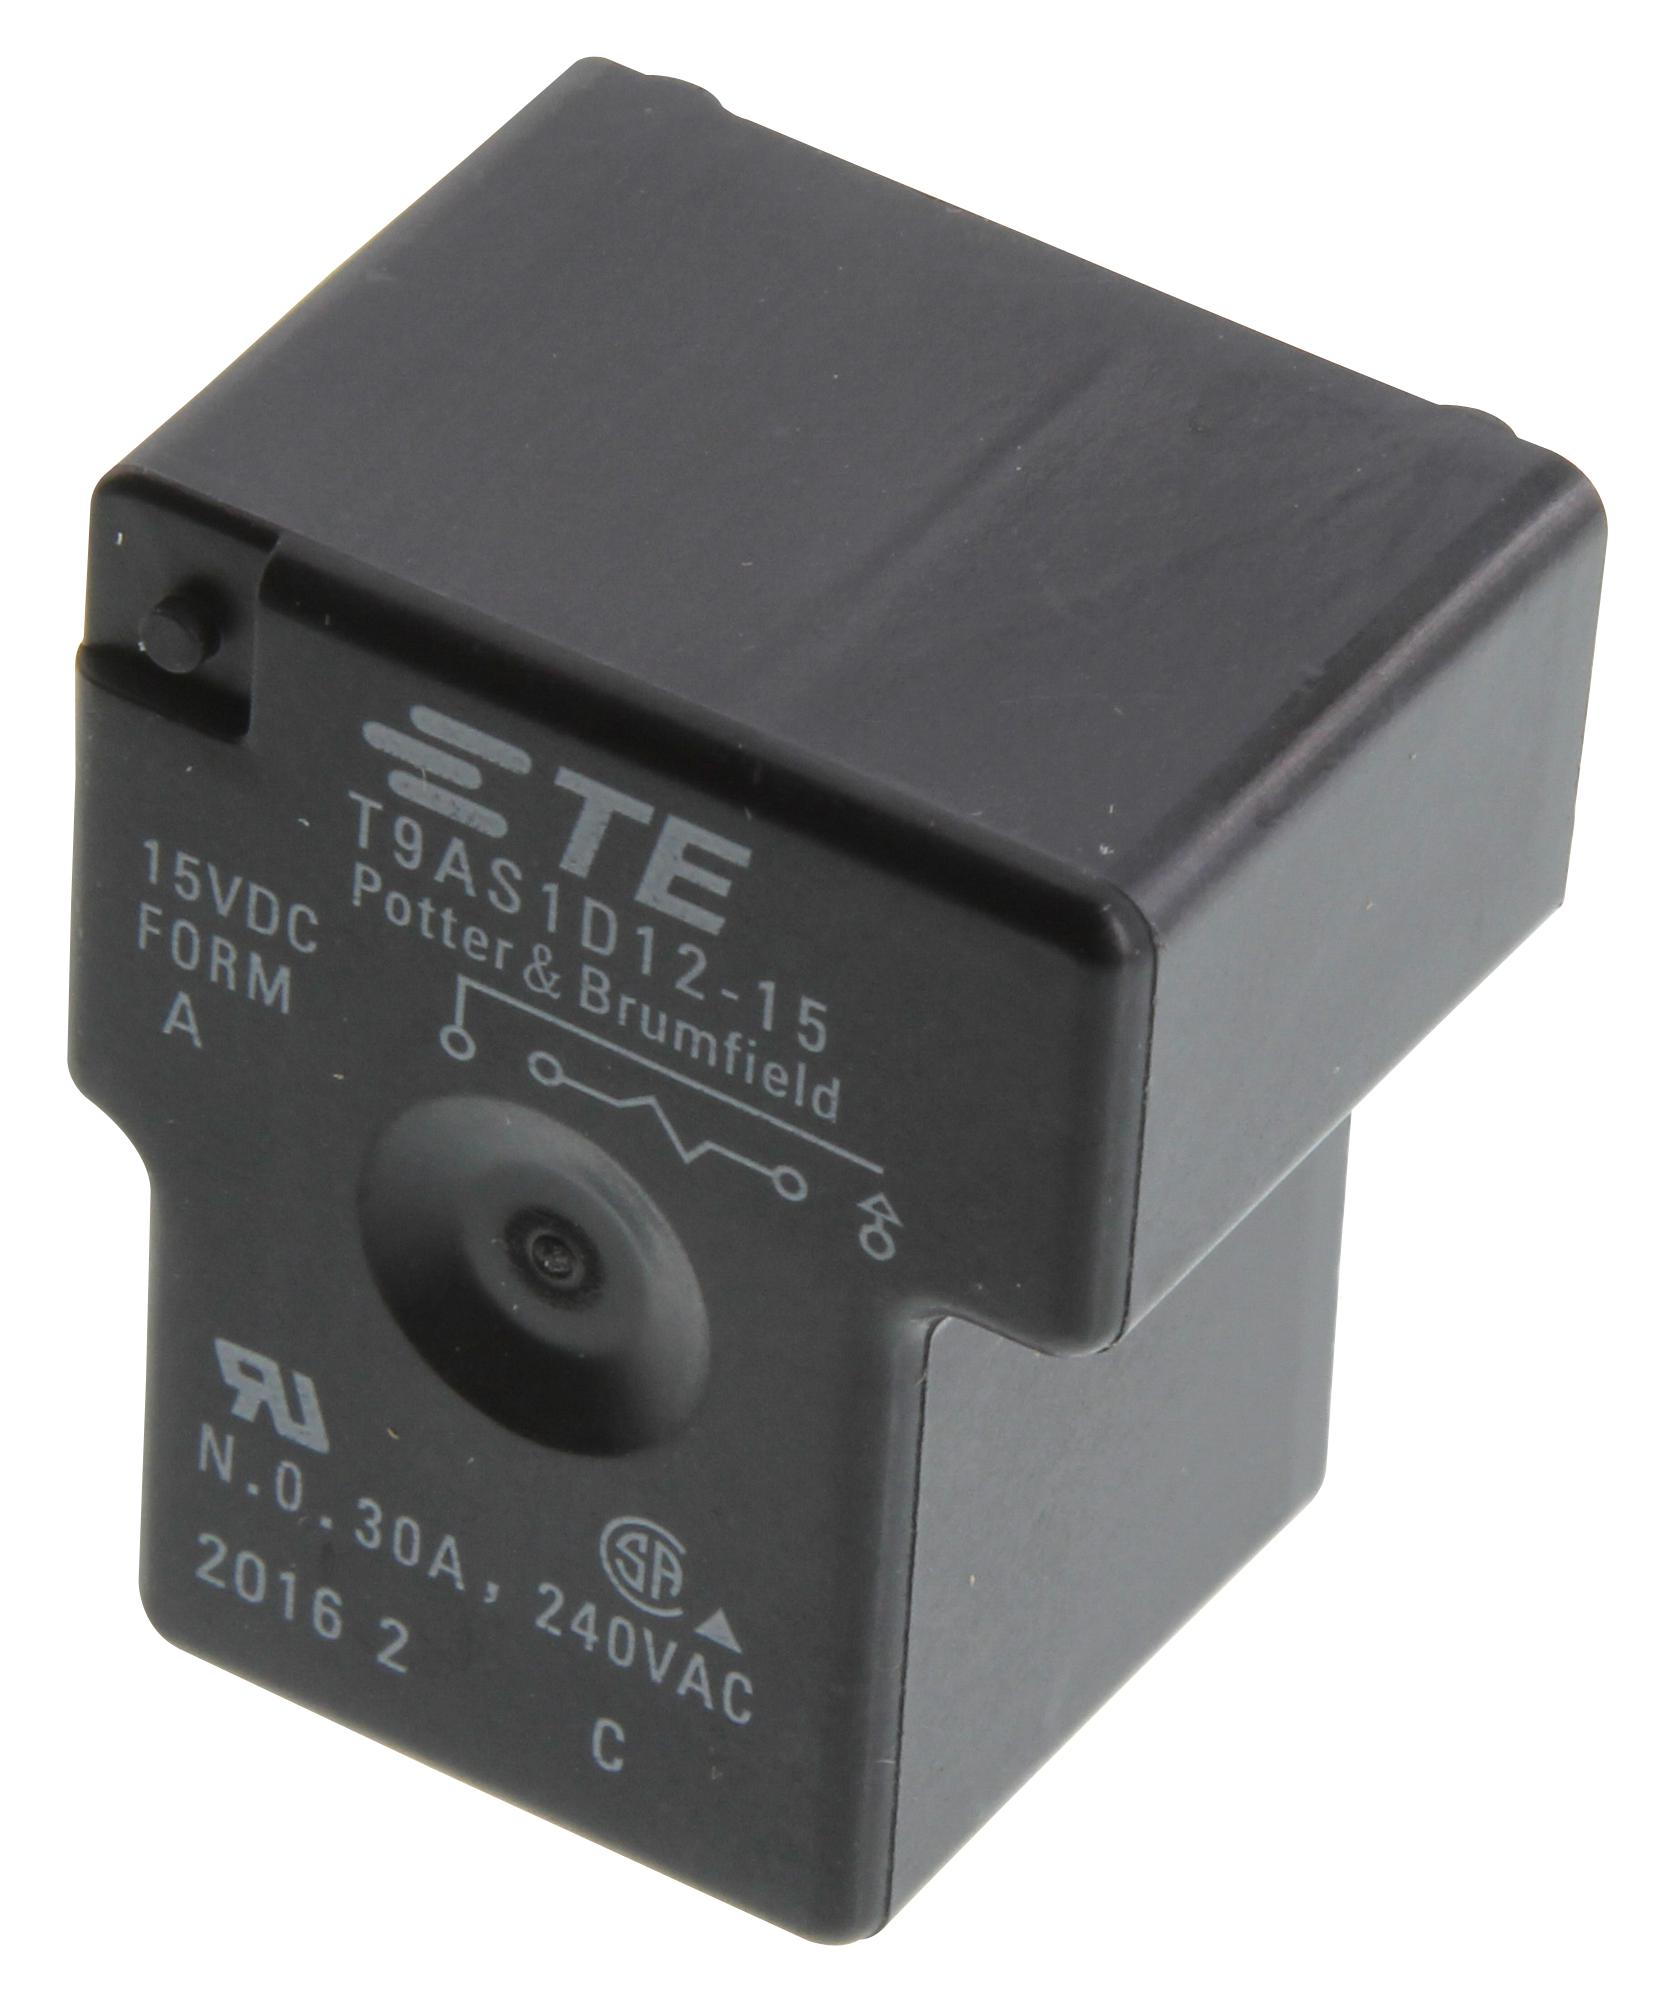 Potter & Brumfield Relays / Te Connectivity 1-1393210-4 Power Relay, Spst-No, 15Vdc, 30A, Tht